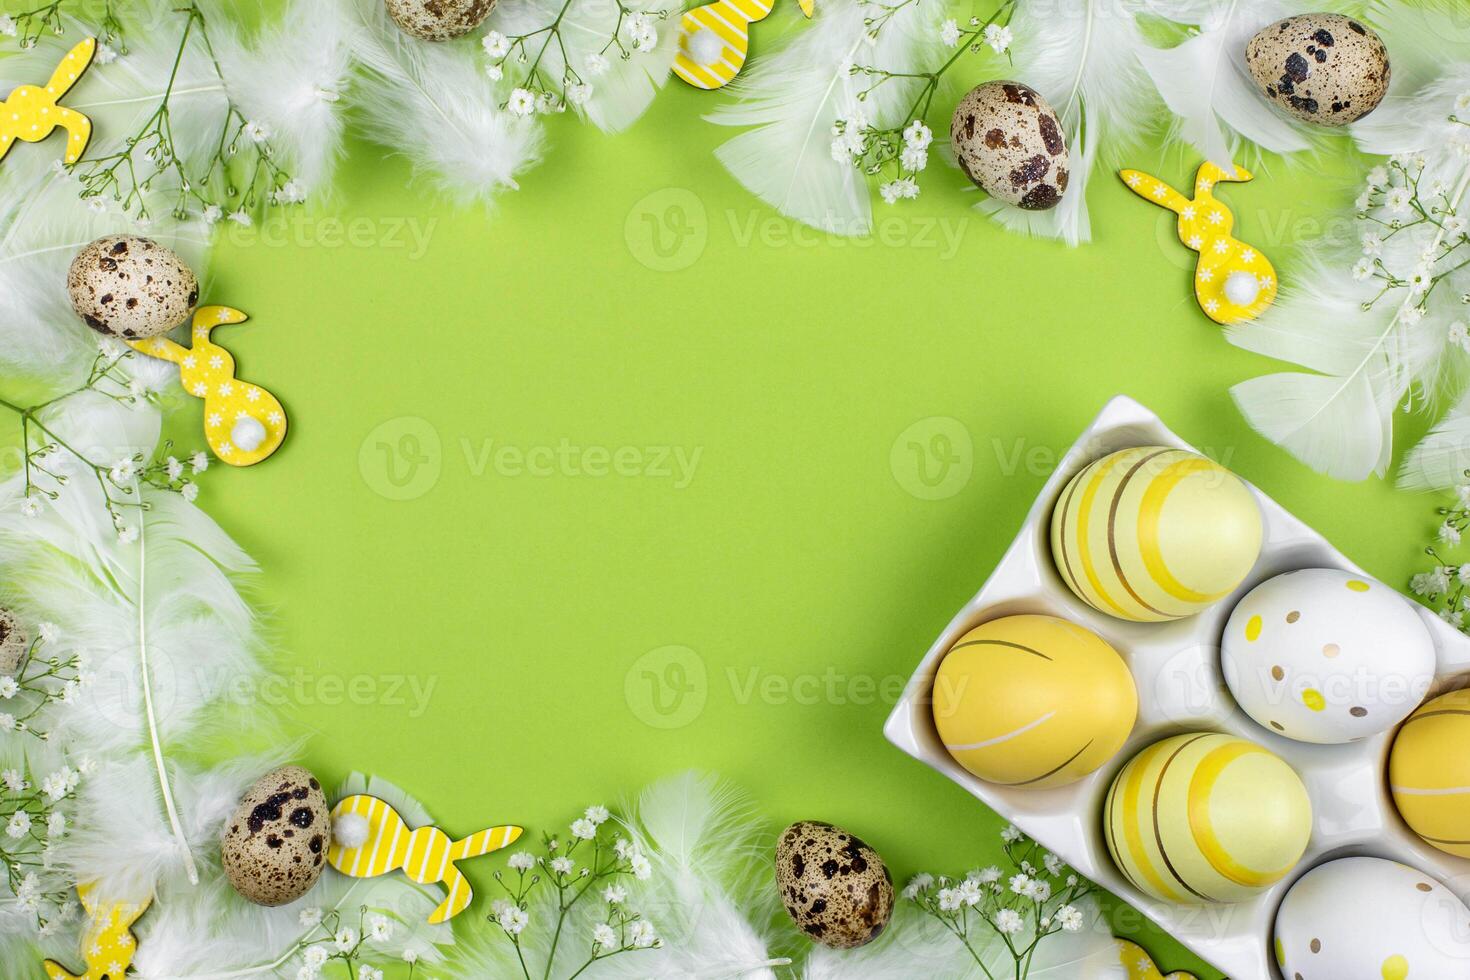 Easter border flat lay with colorful eggs in a white ceramic holder, spring flowers, quail eggs, yellow bunnies and white feathers on a green background. Top view. Copy space. photo